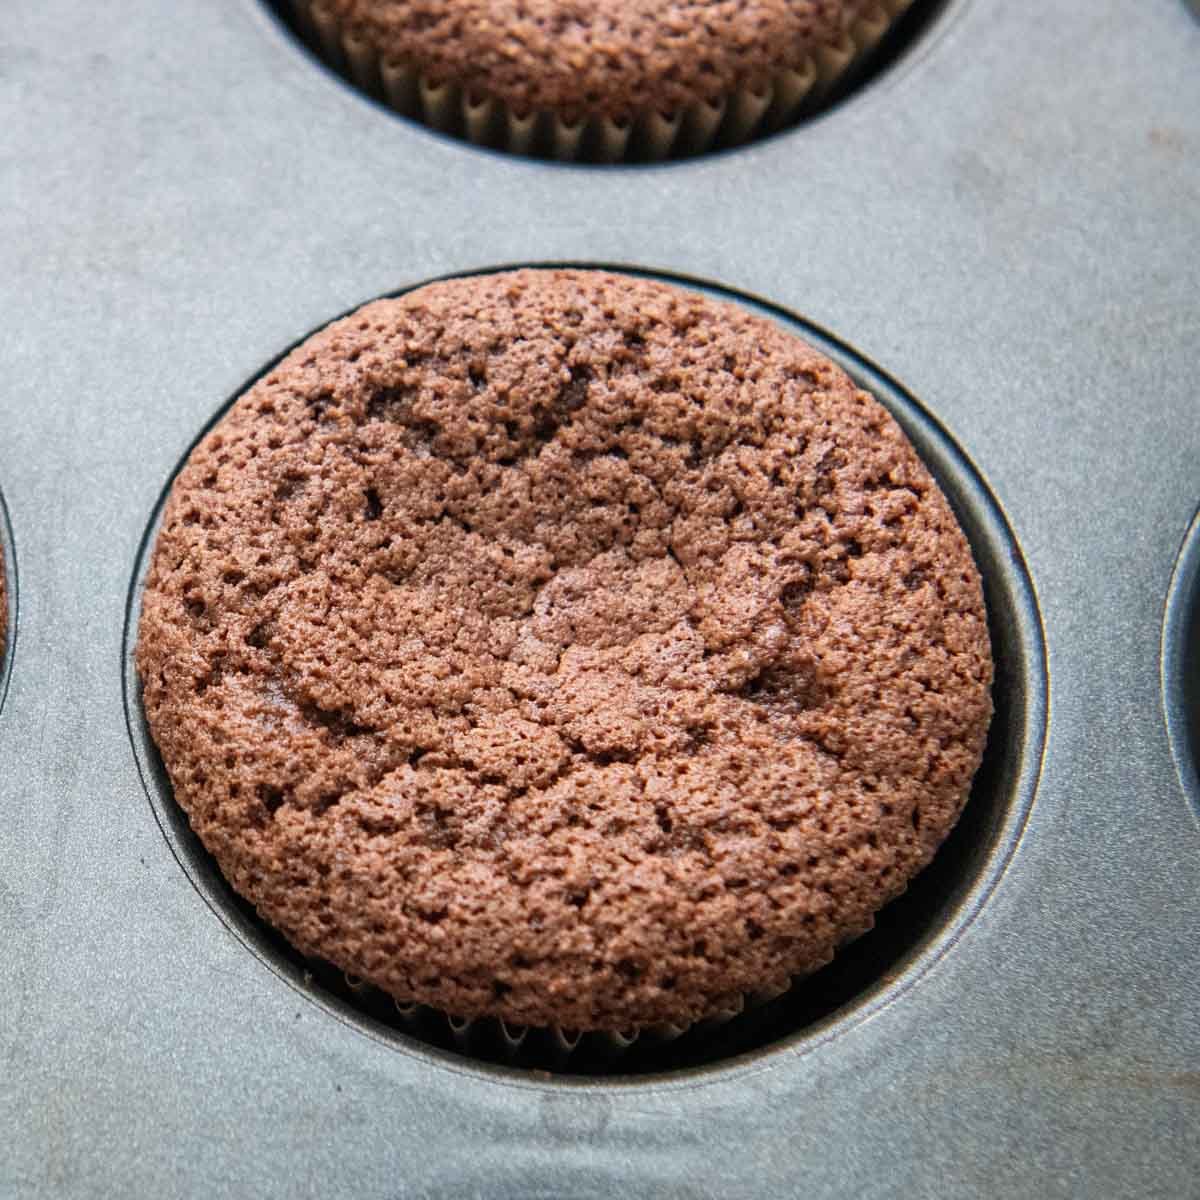 a baked cupcake in a muffin tin.